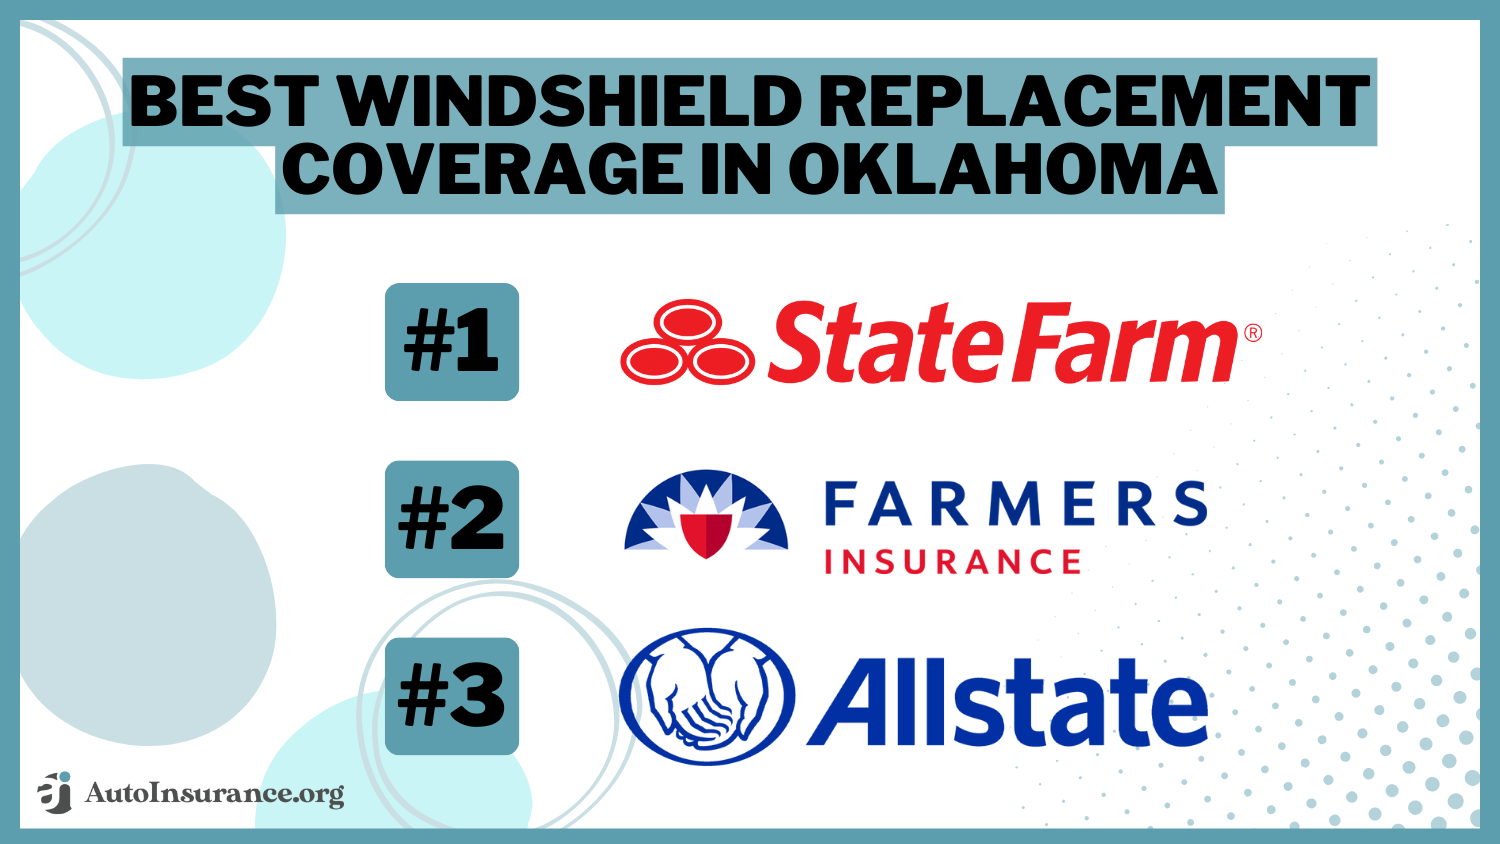 best windshield replacement coverage in Oklahoma State Farm, Farmers, and Allstate